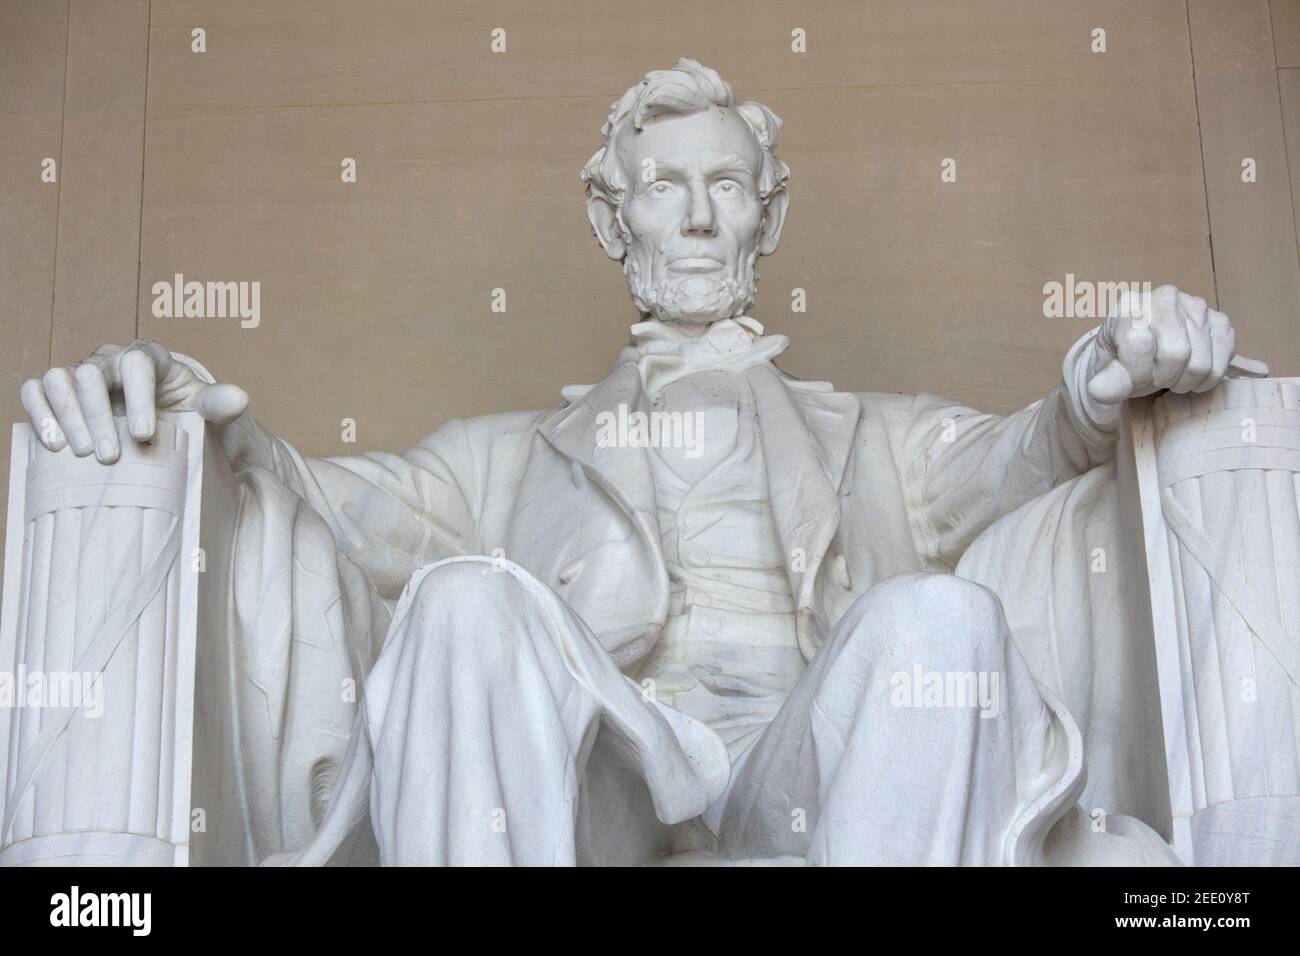 Statue of Abraham Lincoln at the Lincoln memorial, Washington D.C., USA Stock Photo